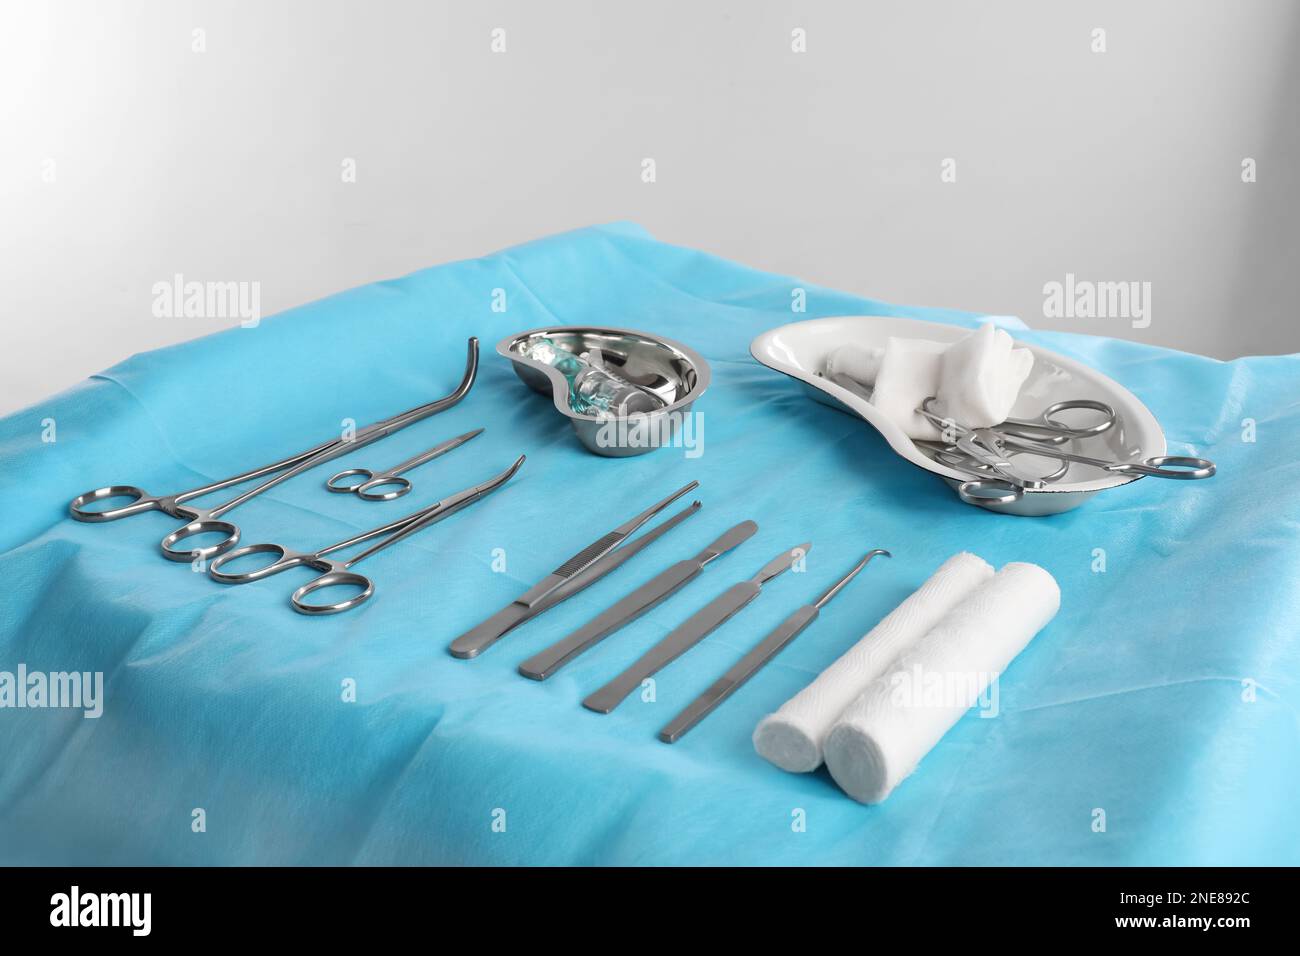 Different surgical instruments on table against light background Stock Photo